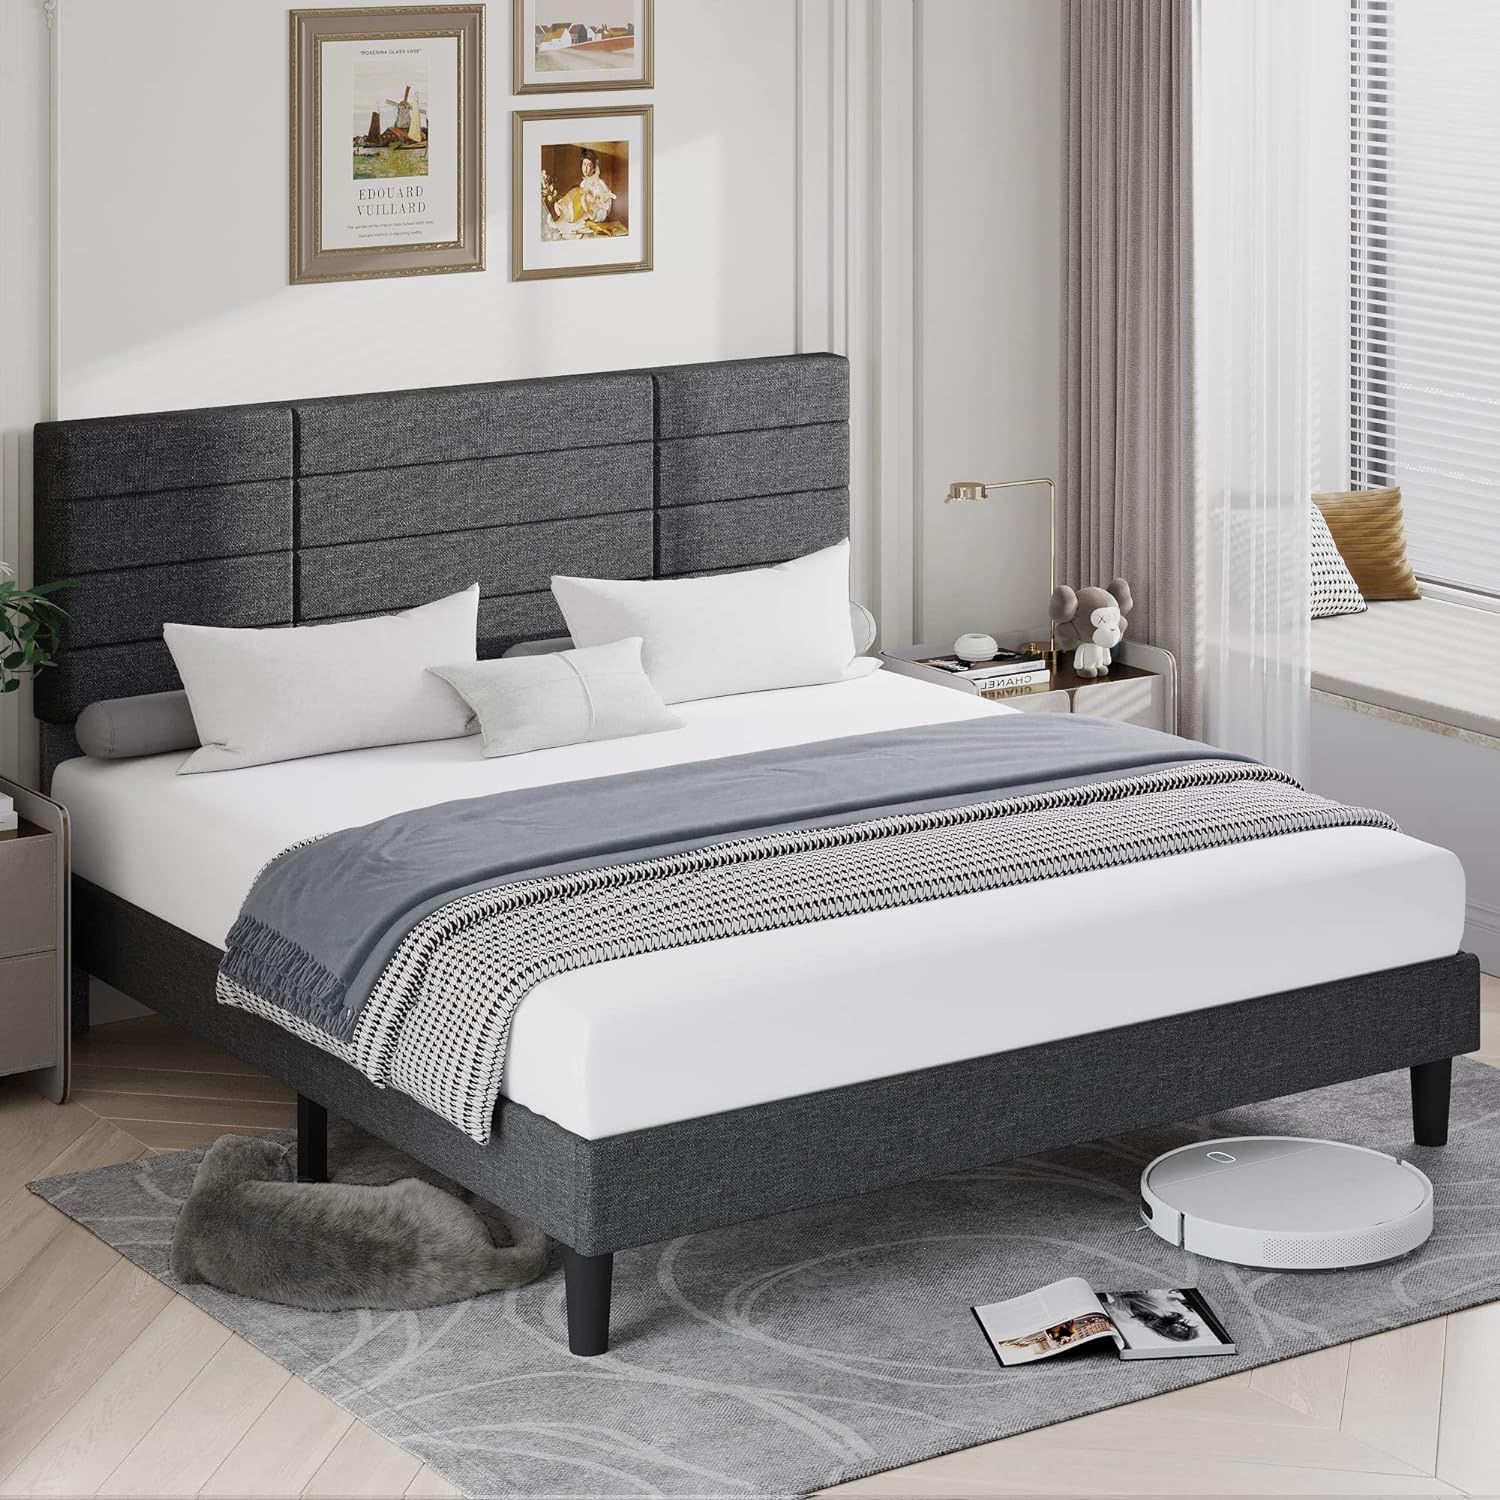 Queen Size Bed frame 